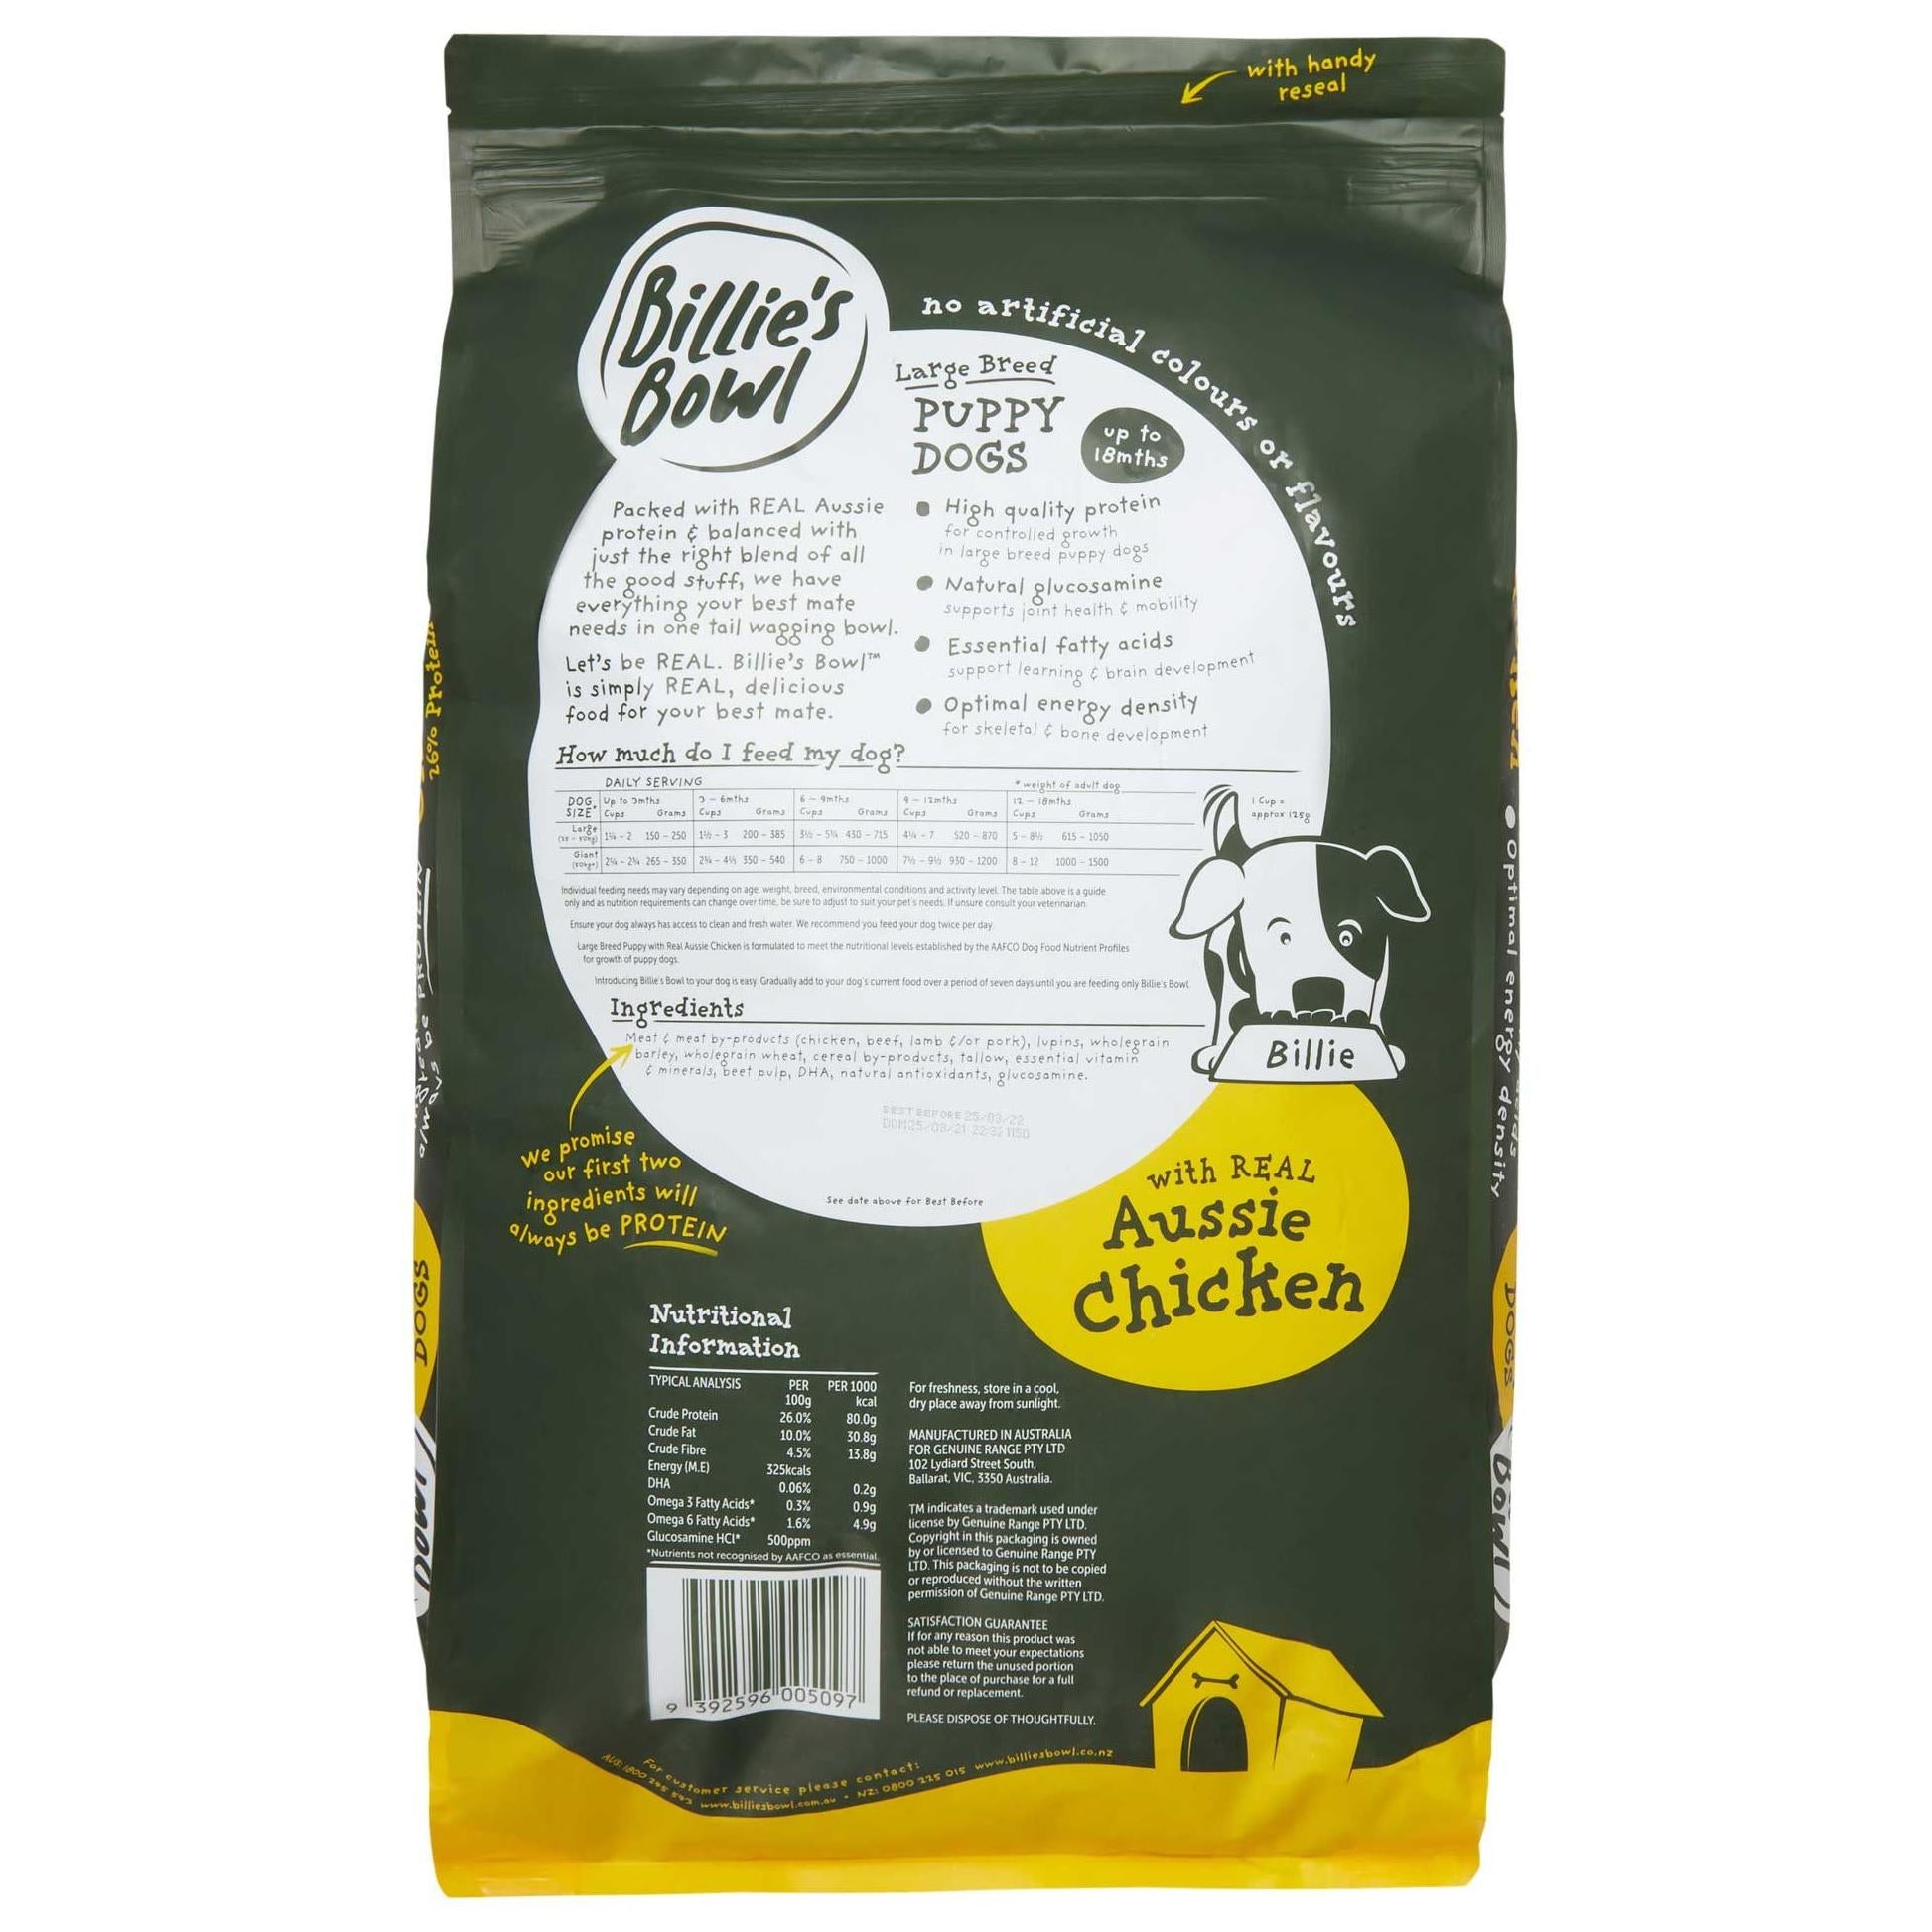 Billie's Bowl Large Breed Puppy with Real Aussie Chicken Dry Dog Food 10kg (100000037684) [default_color]